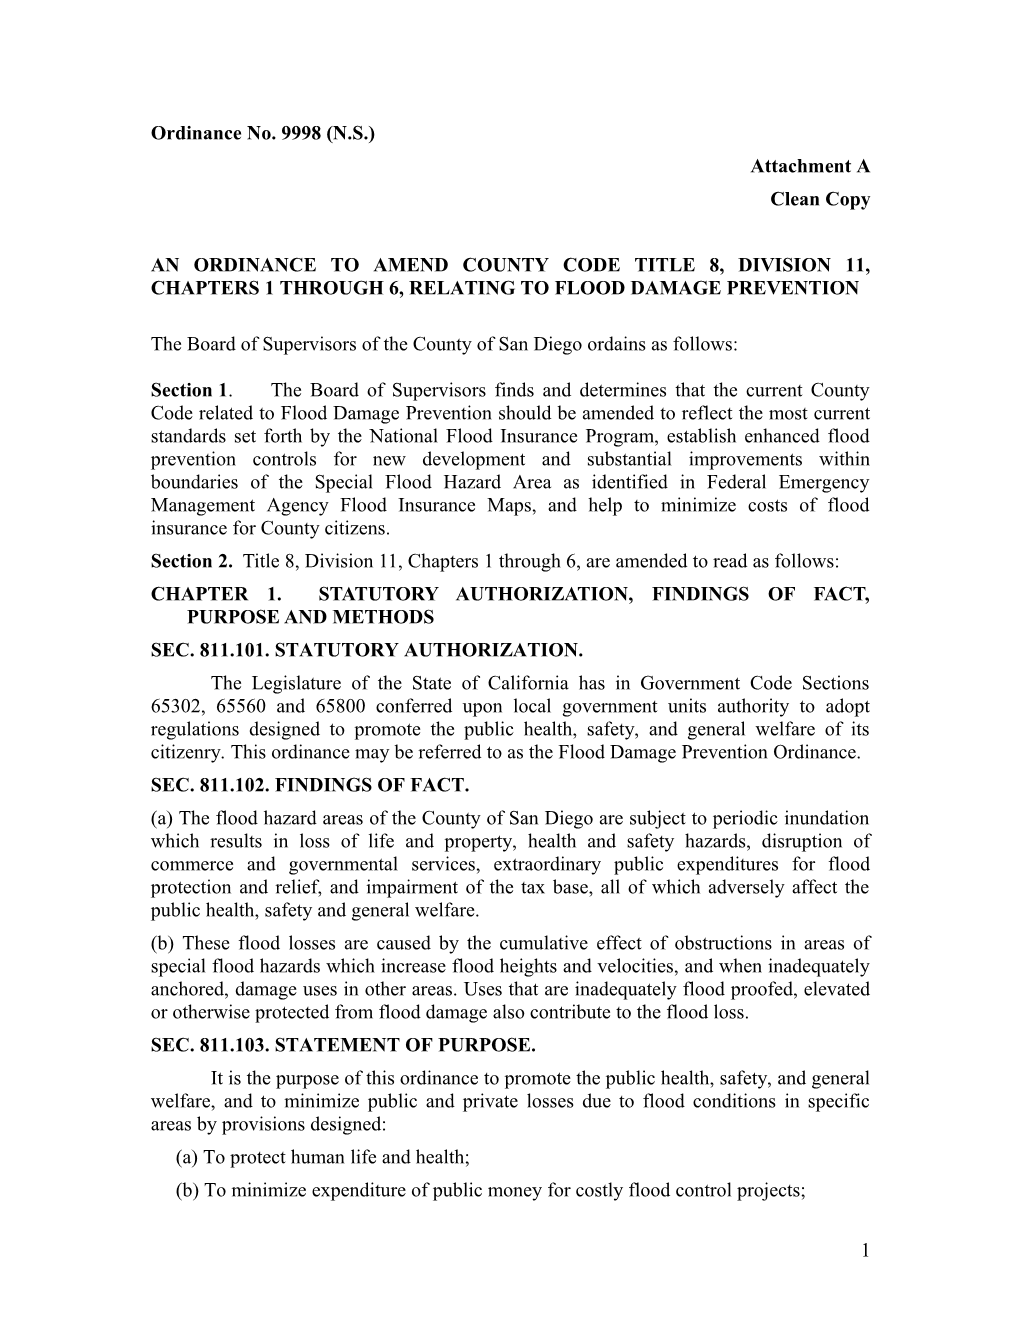 An Ordinance to Amend County Code Title 8, Division 11, Chapters 1 Through 6, Relating